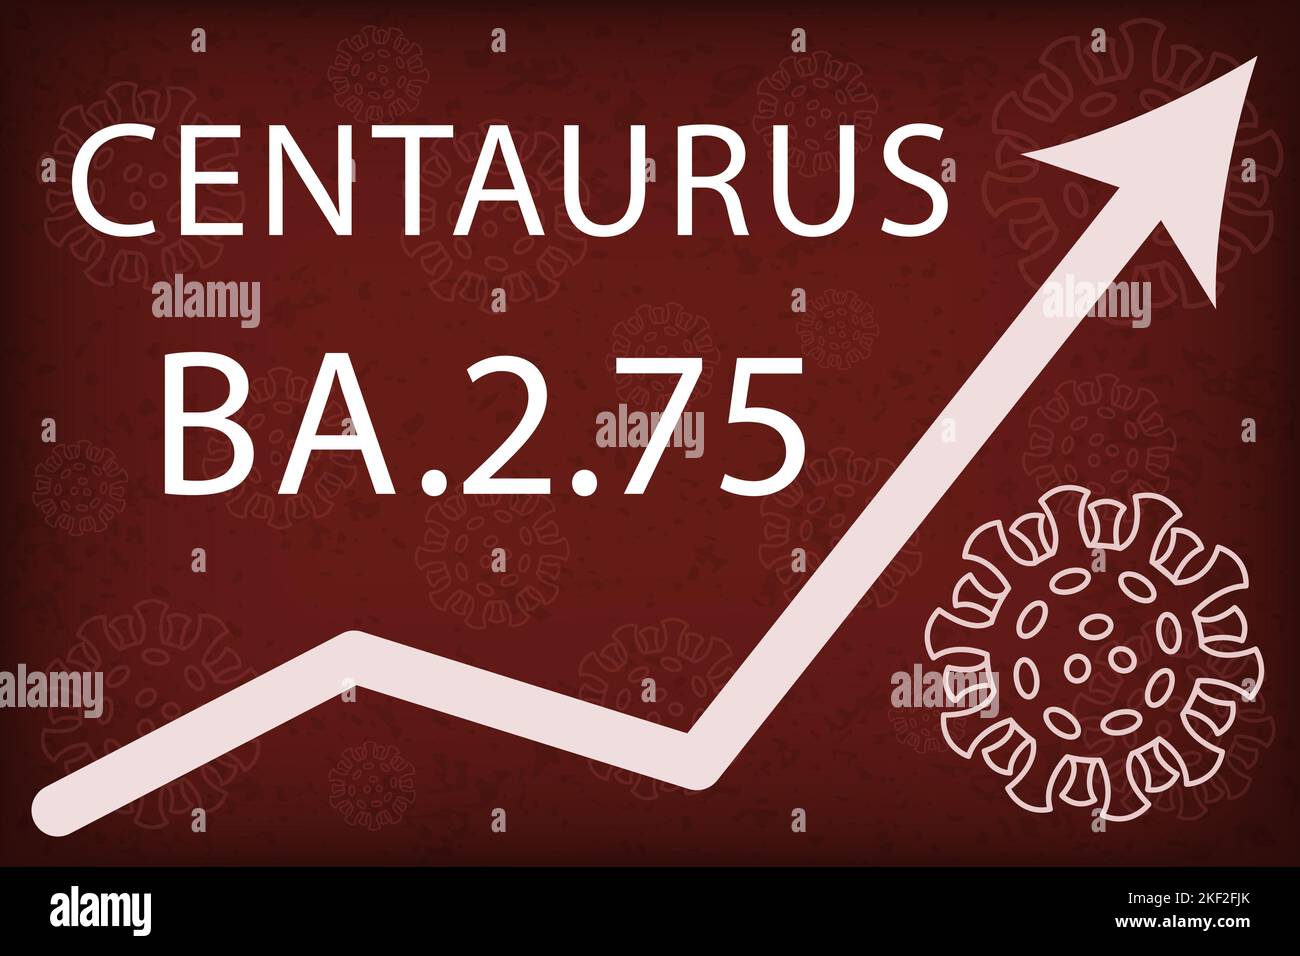 Omicron sub-variant BA.2.75 also known as Centaurus. The arrow shows a dramatic increase in disease. White text on dark red background with images of Stock Vector